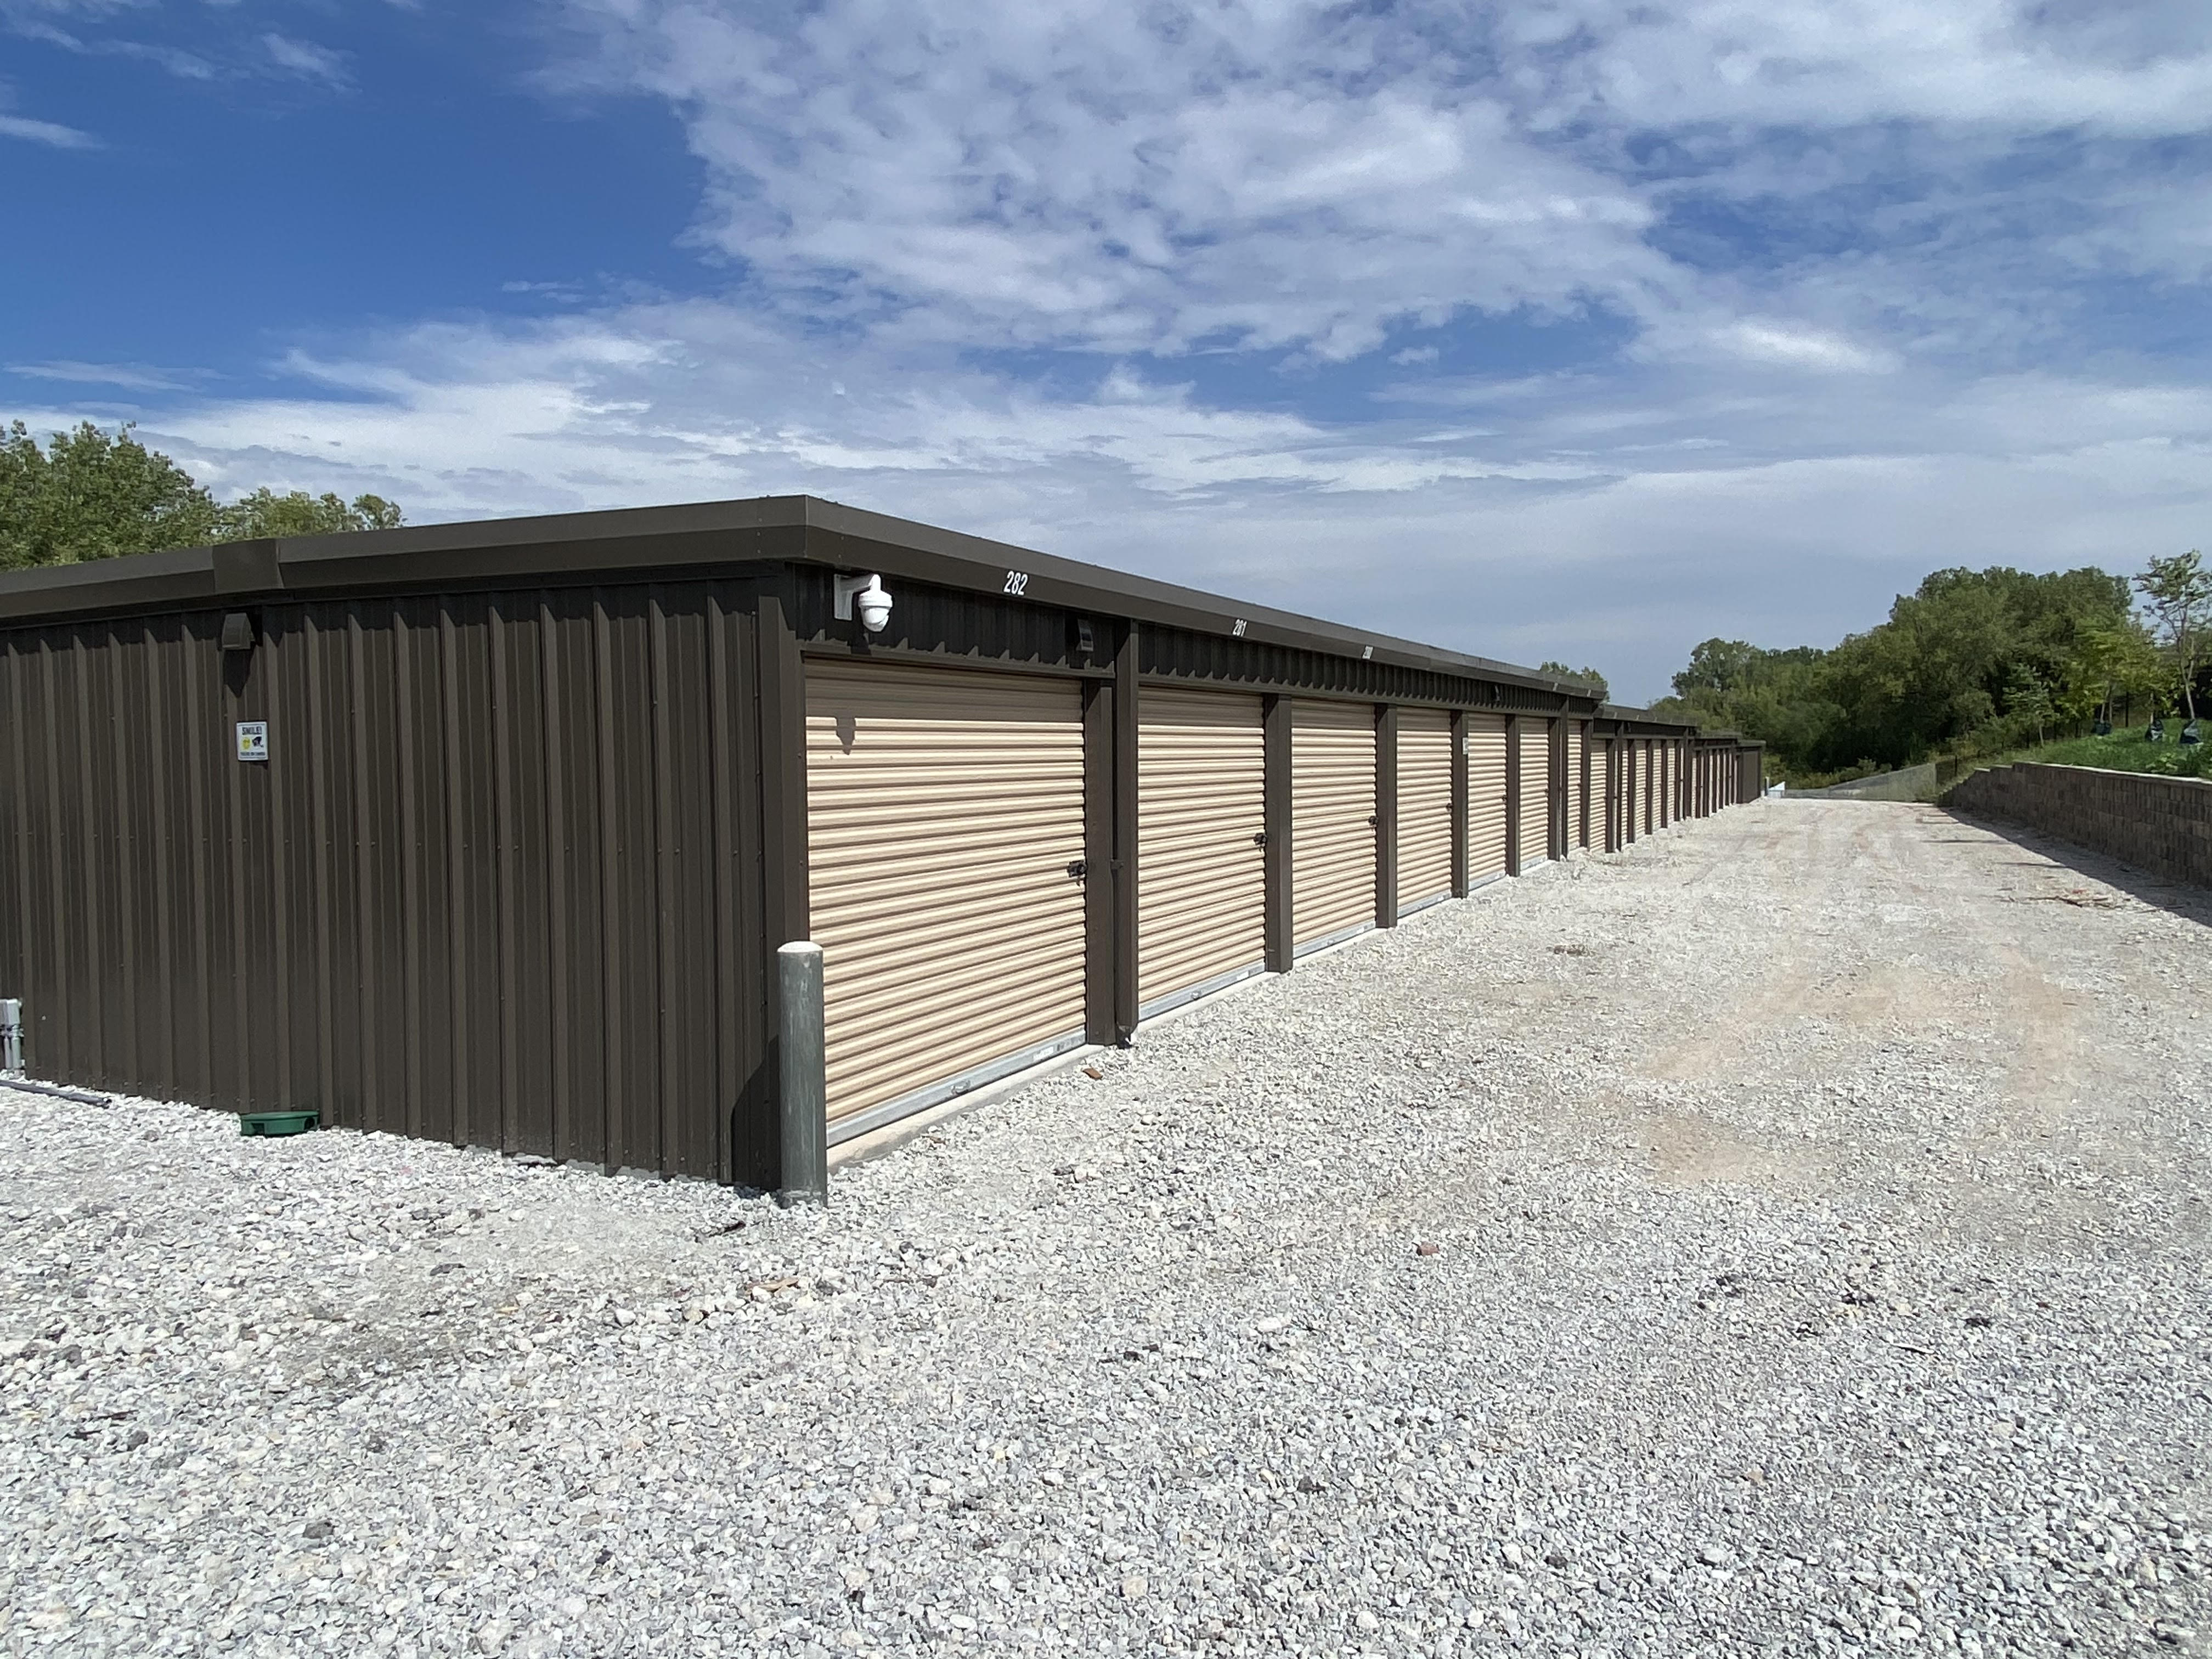 Self-Storage Units are available with Storage Ninjas - Ashland with discounts available!